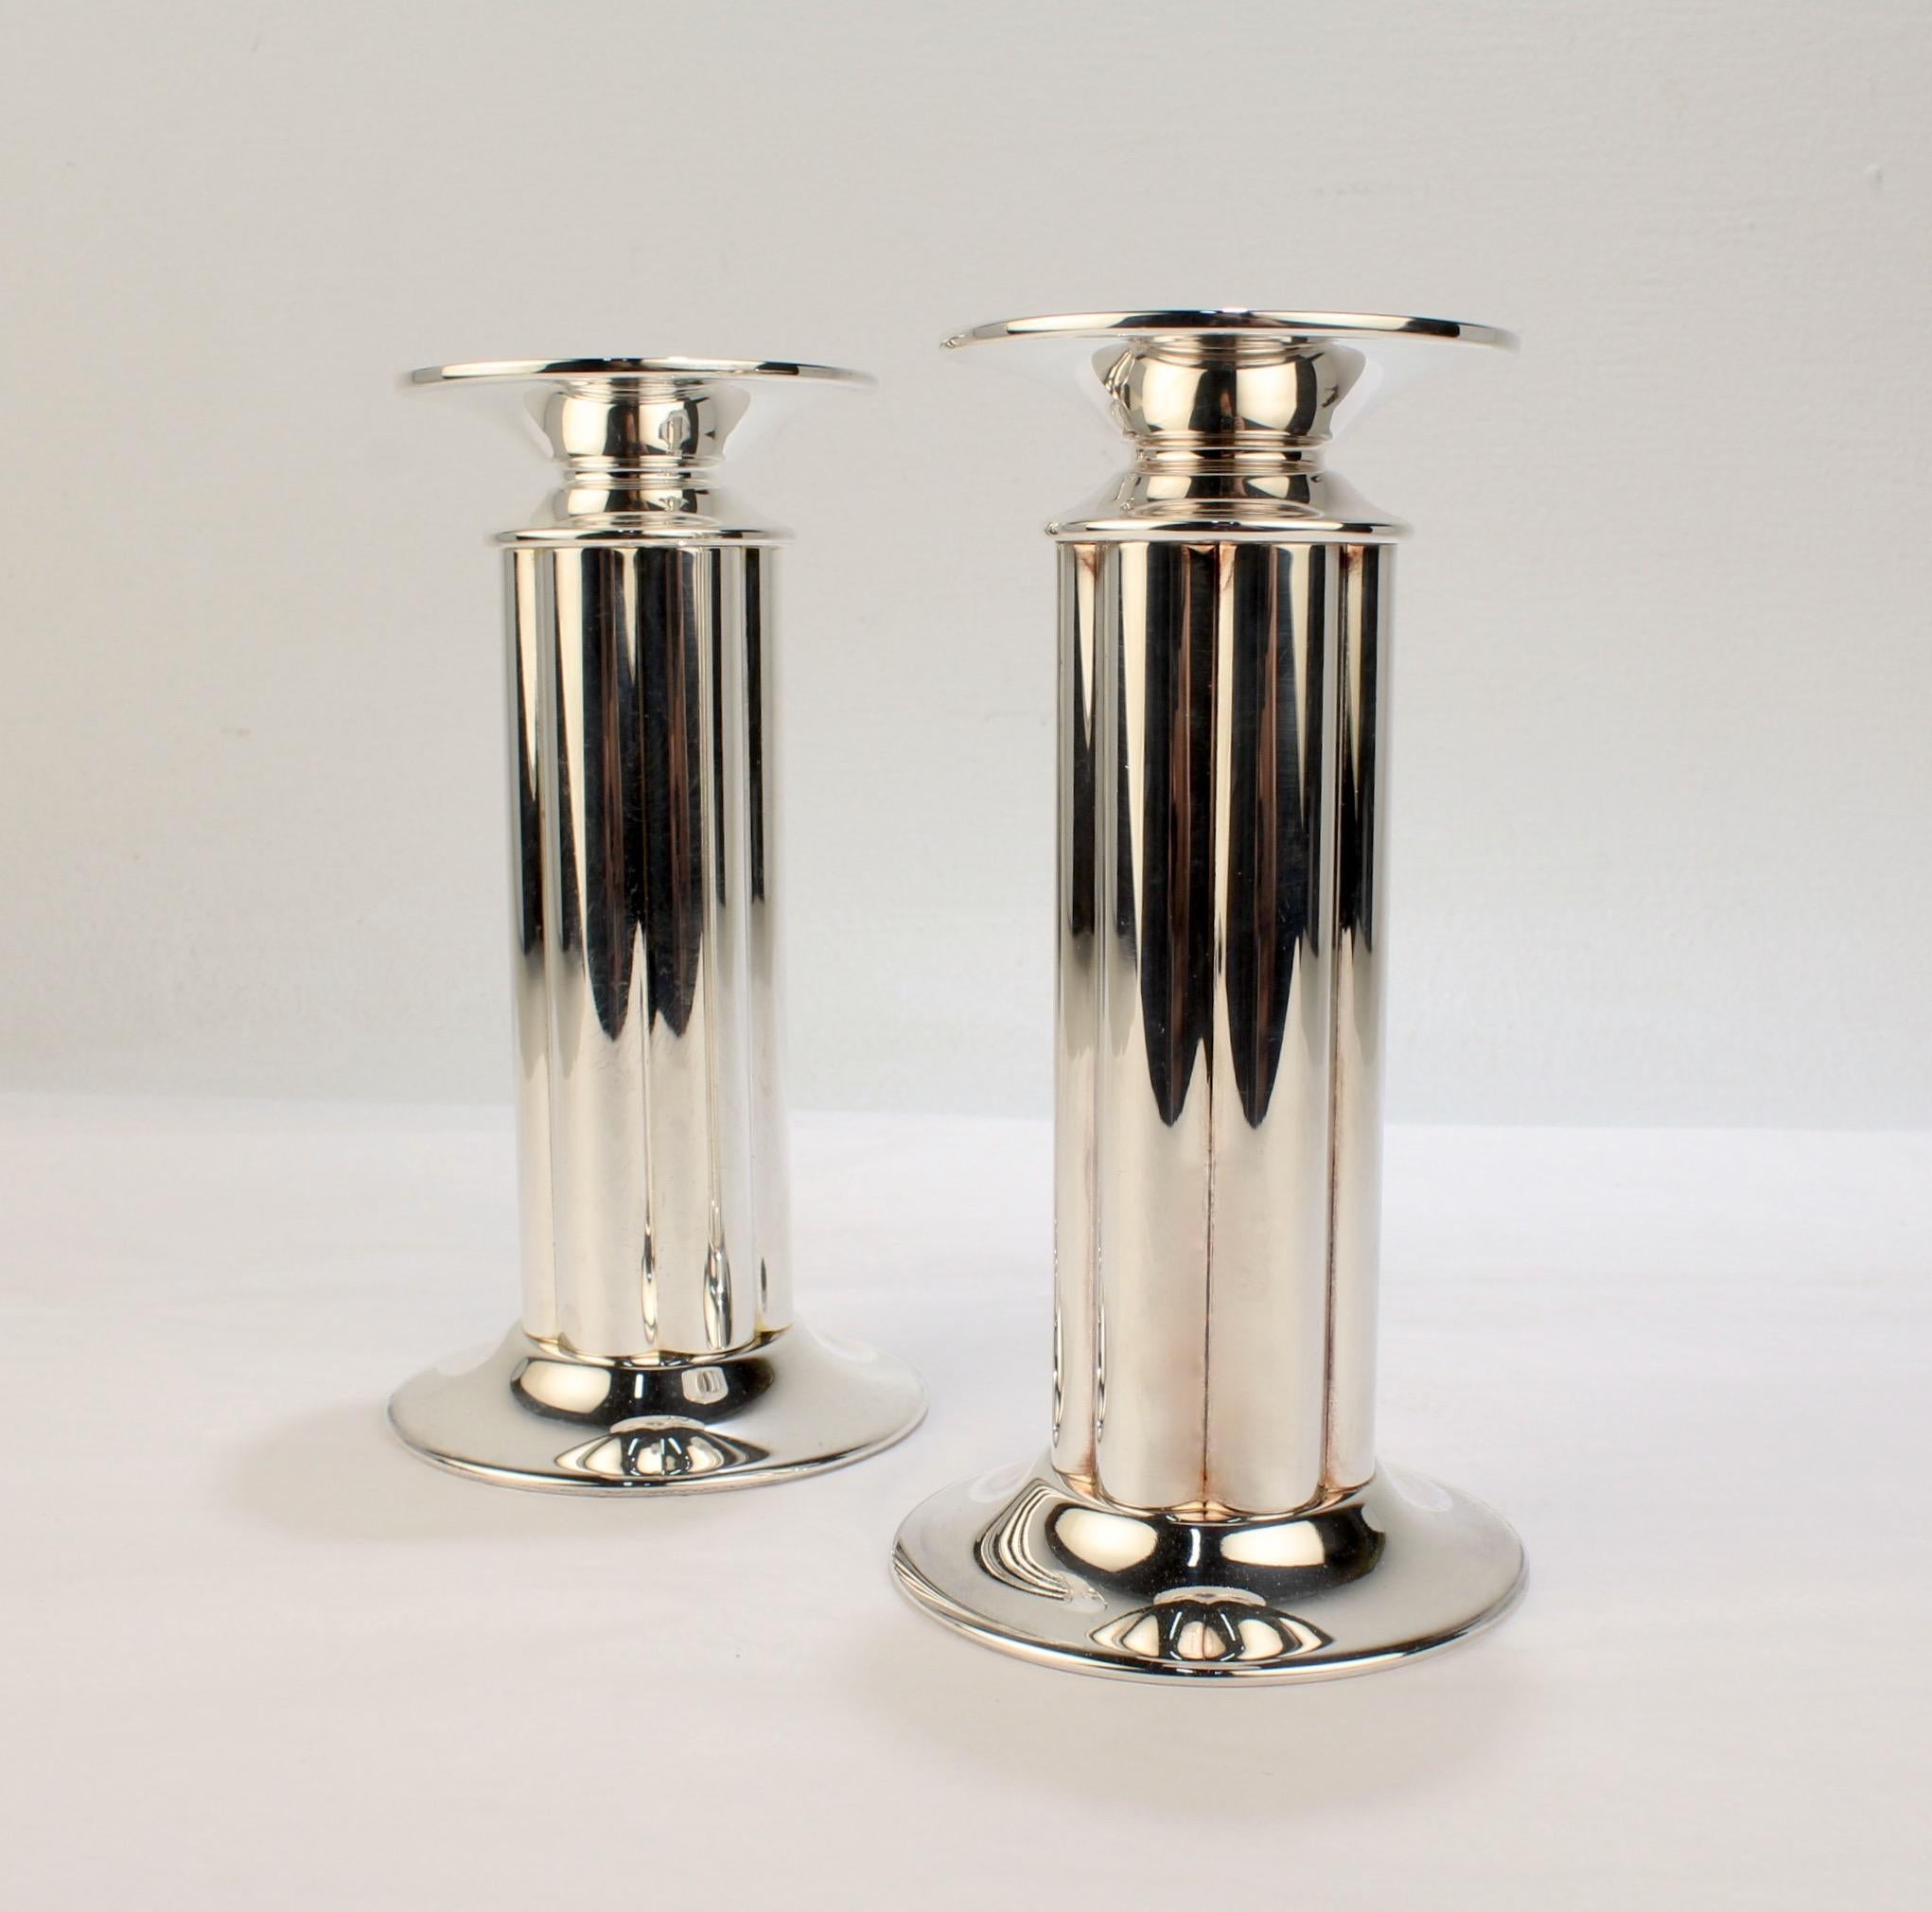 A fine pair of postmodern silver-plated candlesticks.

Designed by Robert A. M. Stern for Swid Powell.

In the form of stout, fluted columns with broad flat bobeches. 

Swid Powell was the highly acclaimed New York City based tableware company